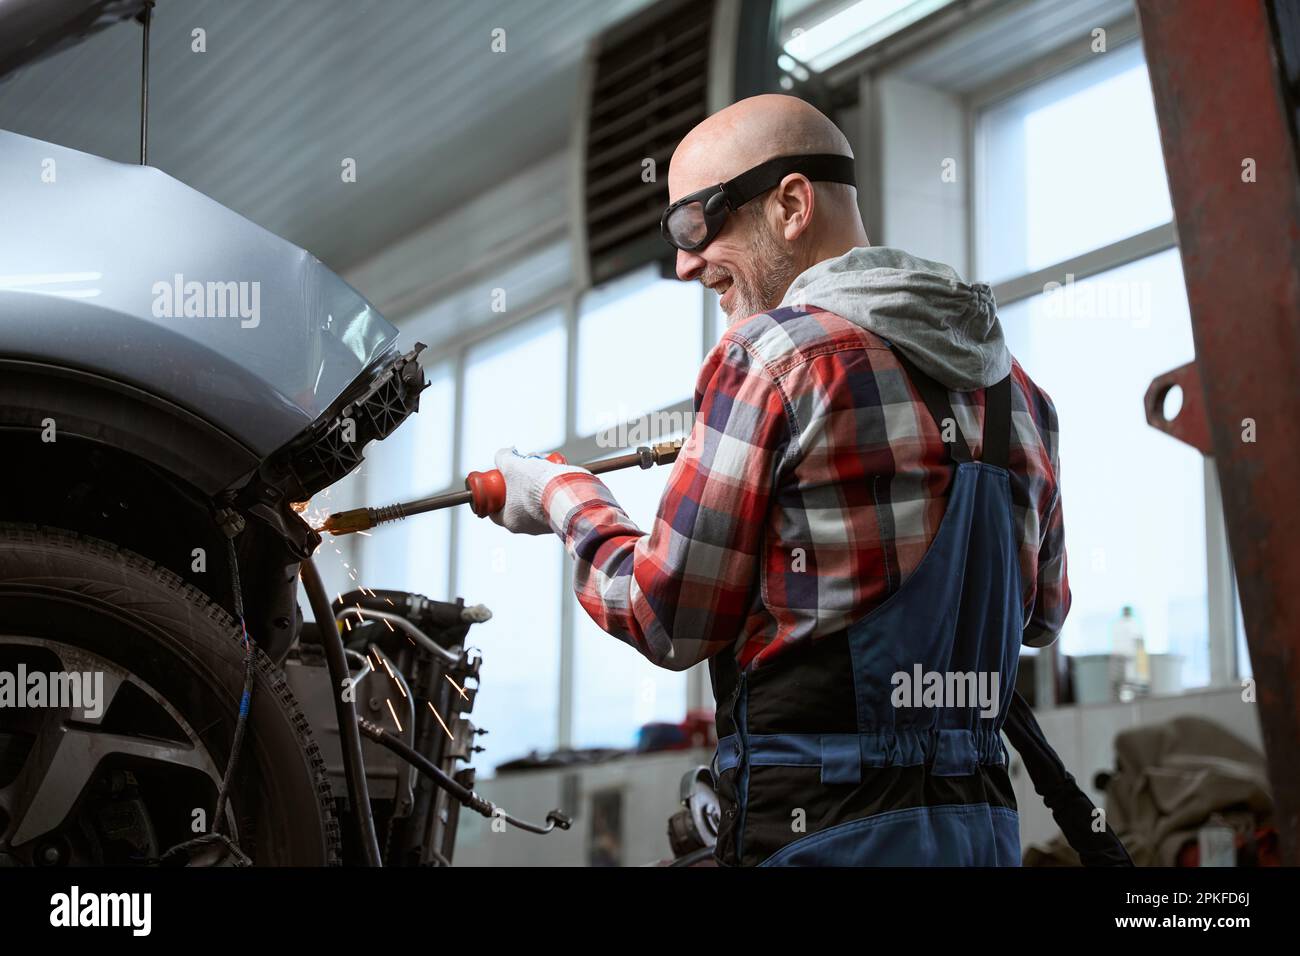 Auto repairman in goggles repairing a car after an accident Stock Photo